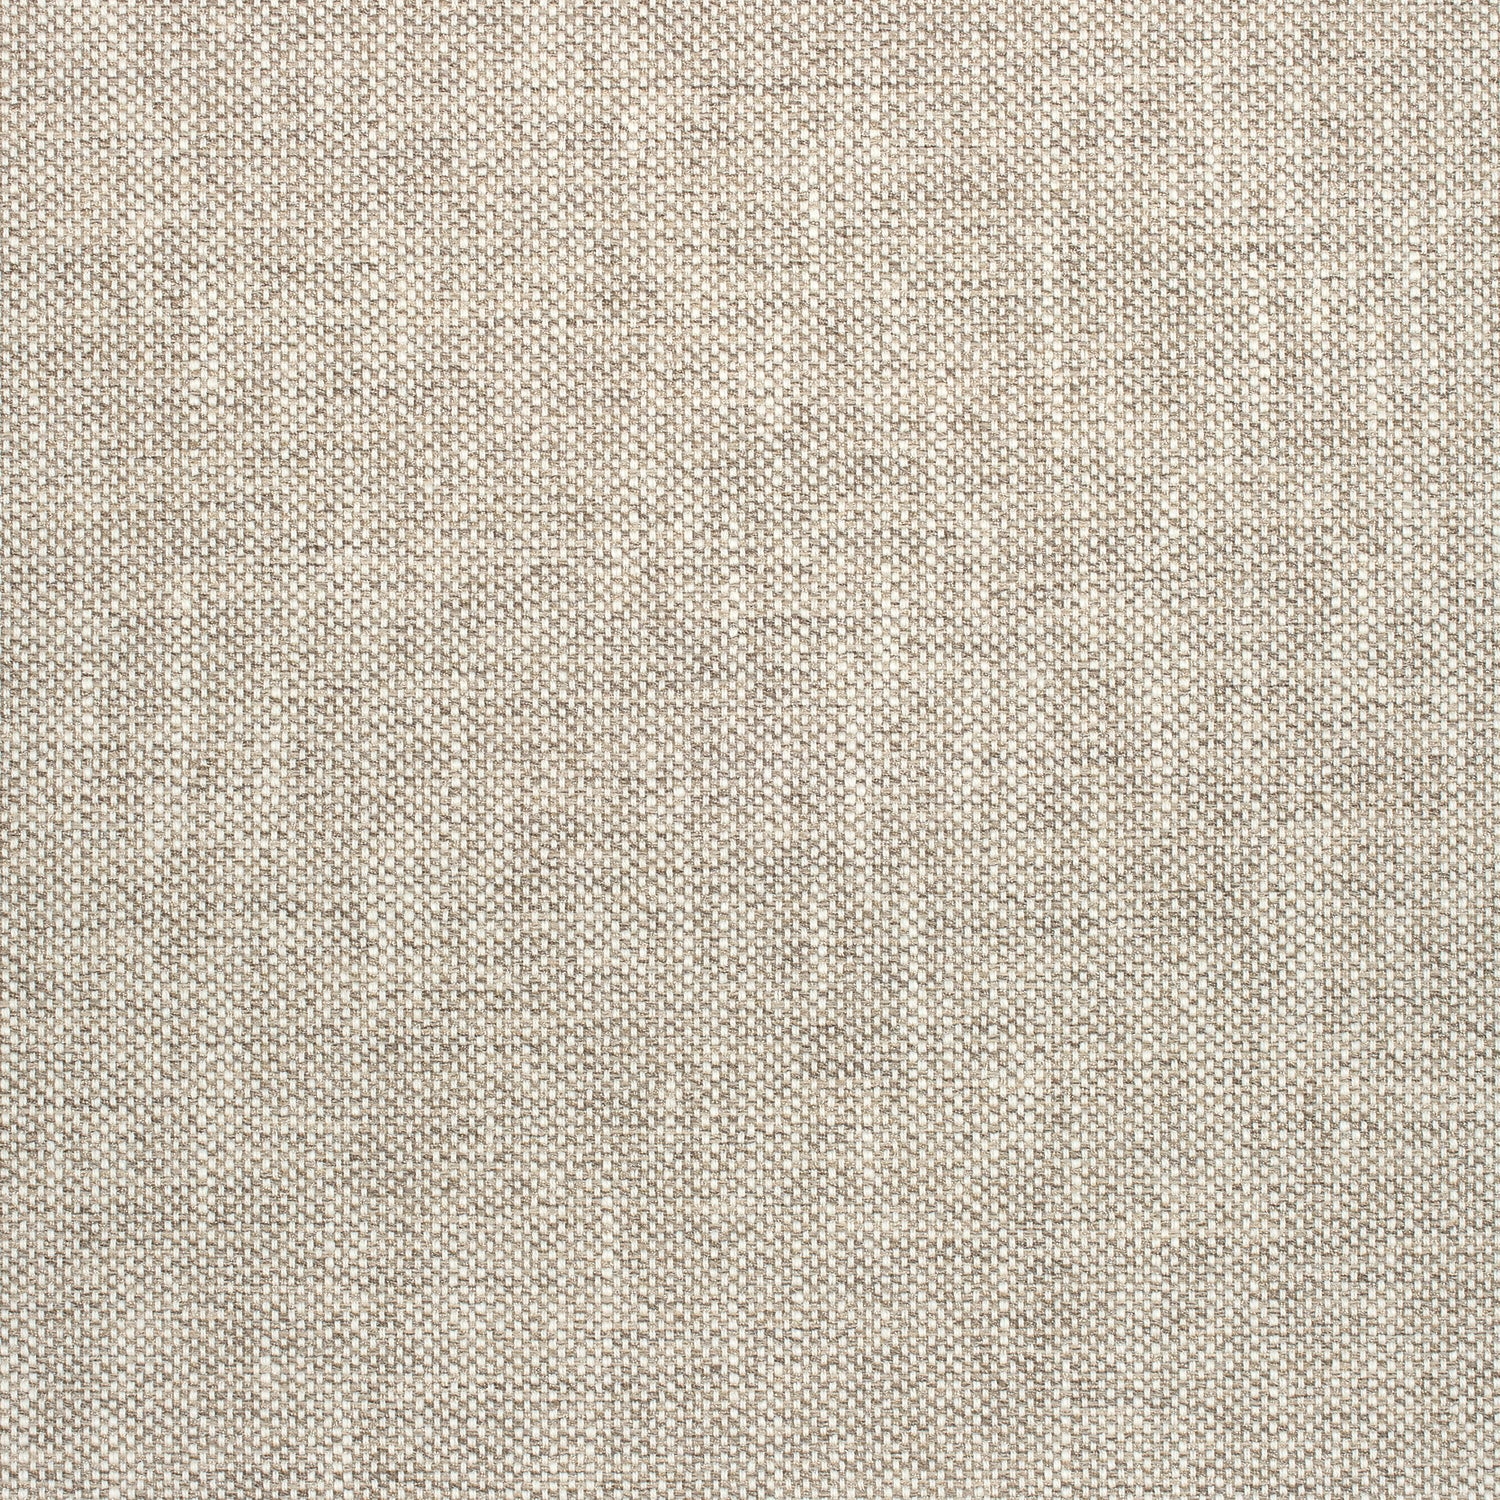 Wellfleet fabric in linen color - pattern number W73423 - by Thibaut in the Landmark Textures collection